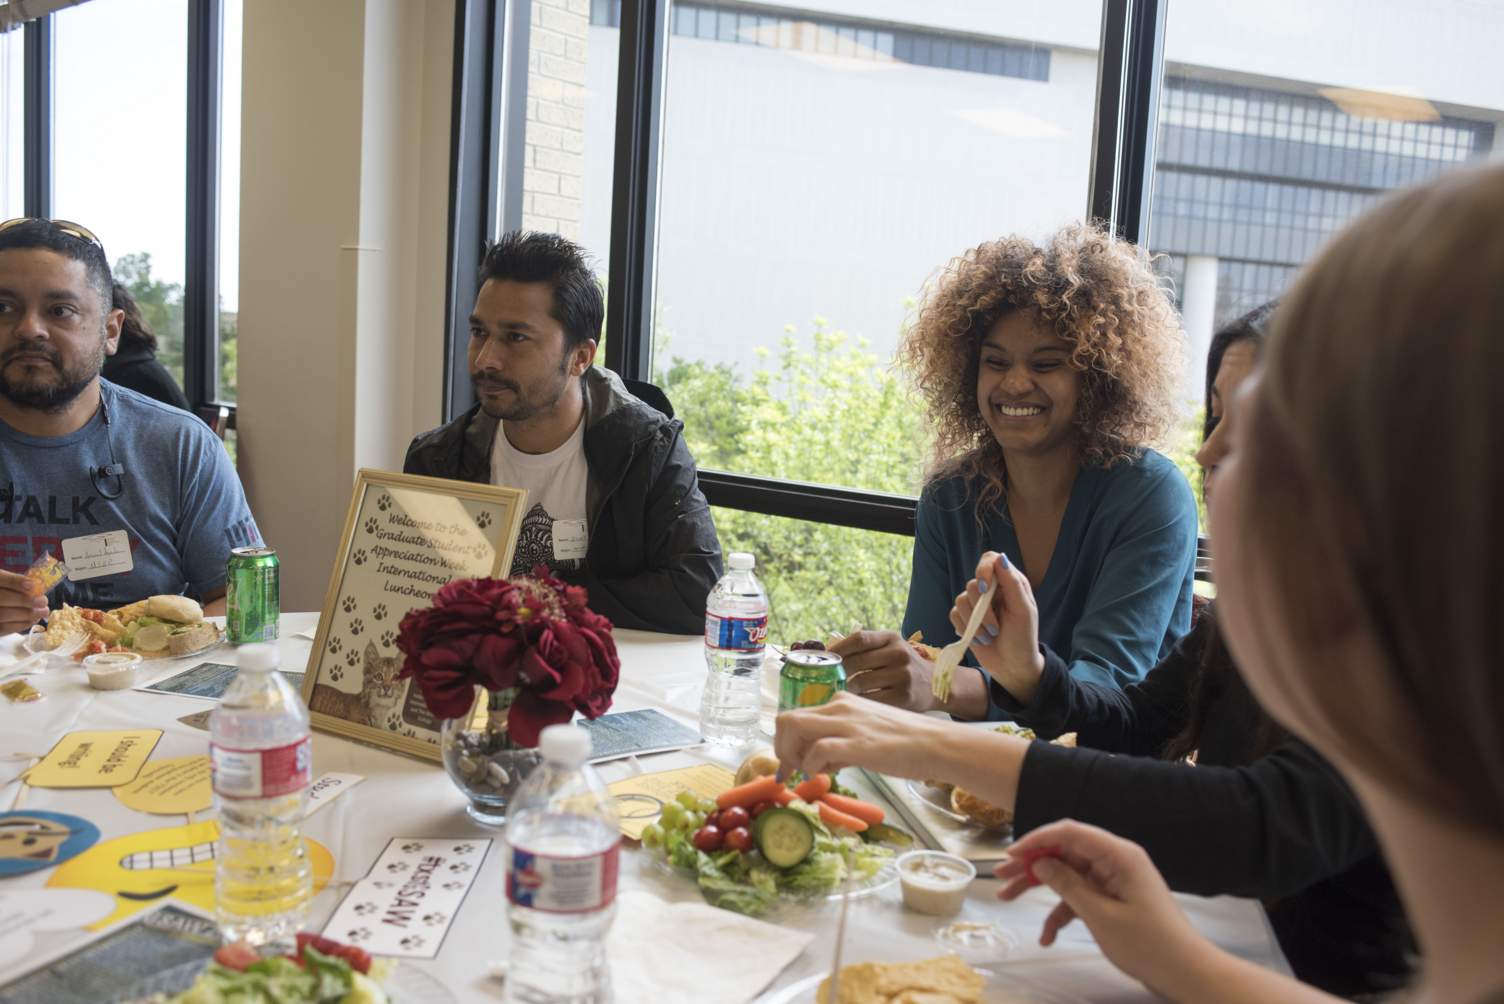 a group of students share a table and conversation during an event luncheon